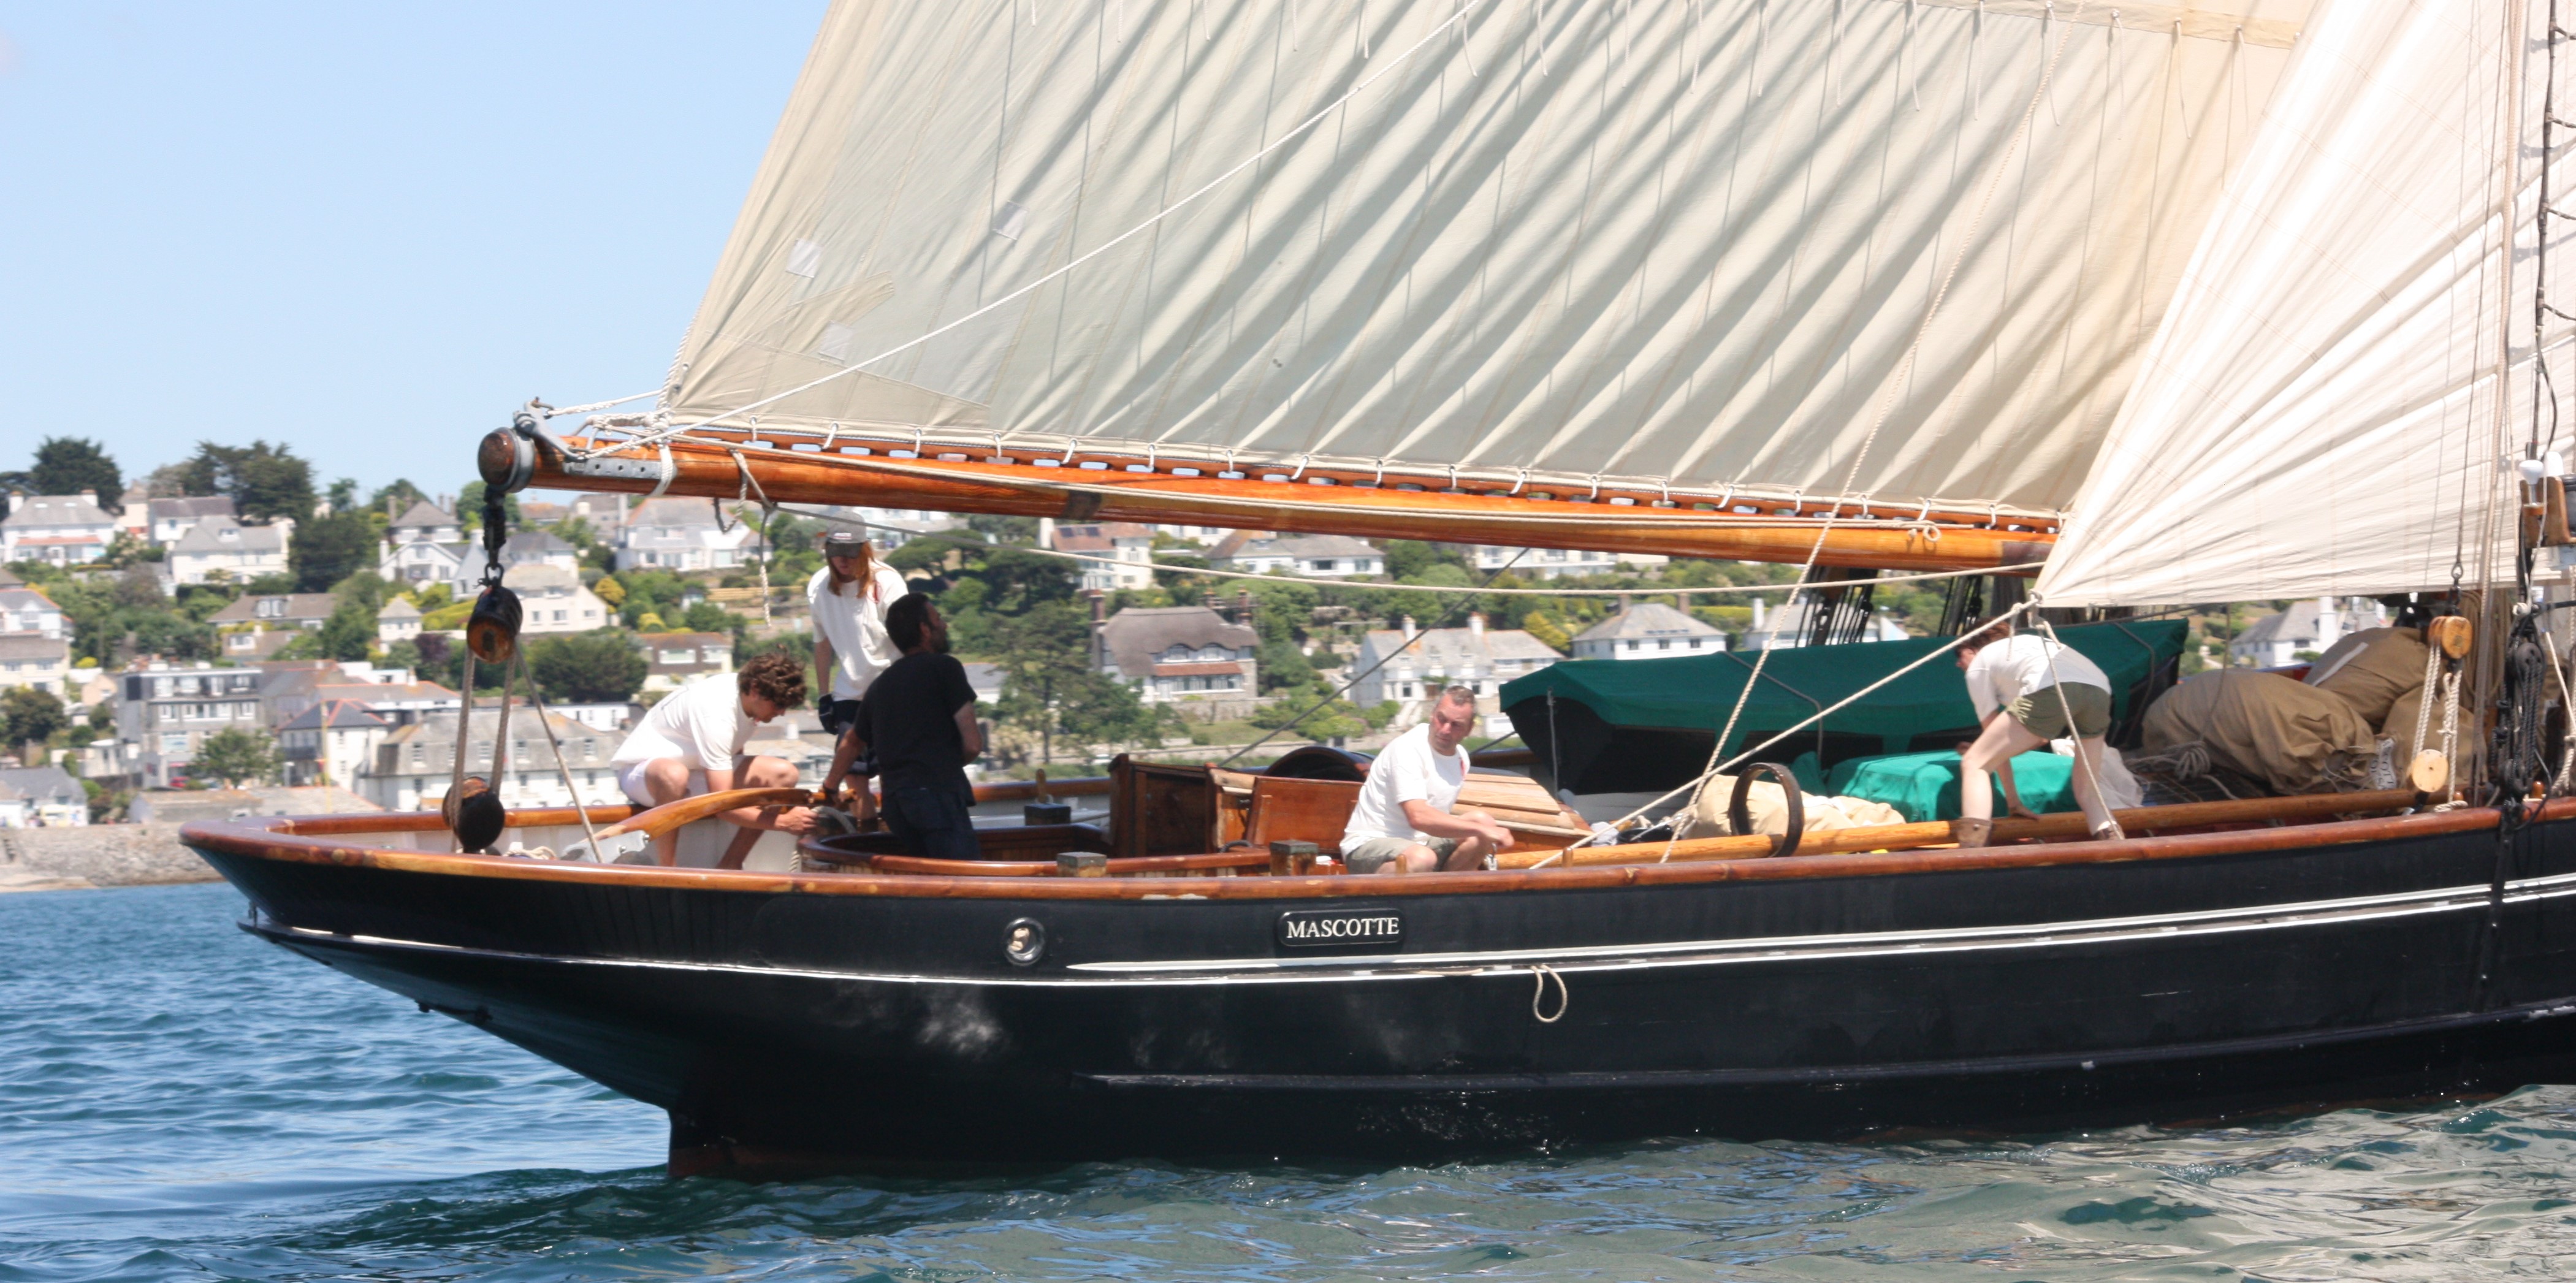 short sailing breaks from £250 on the largest Bristol Channel Pilot Cutter Mascotte in Cornwall